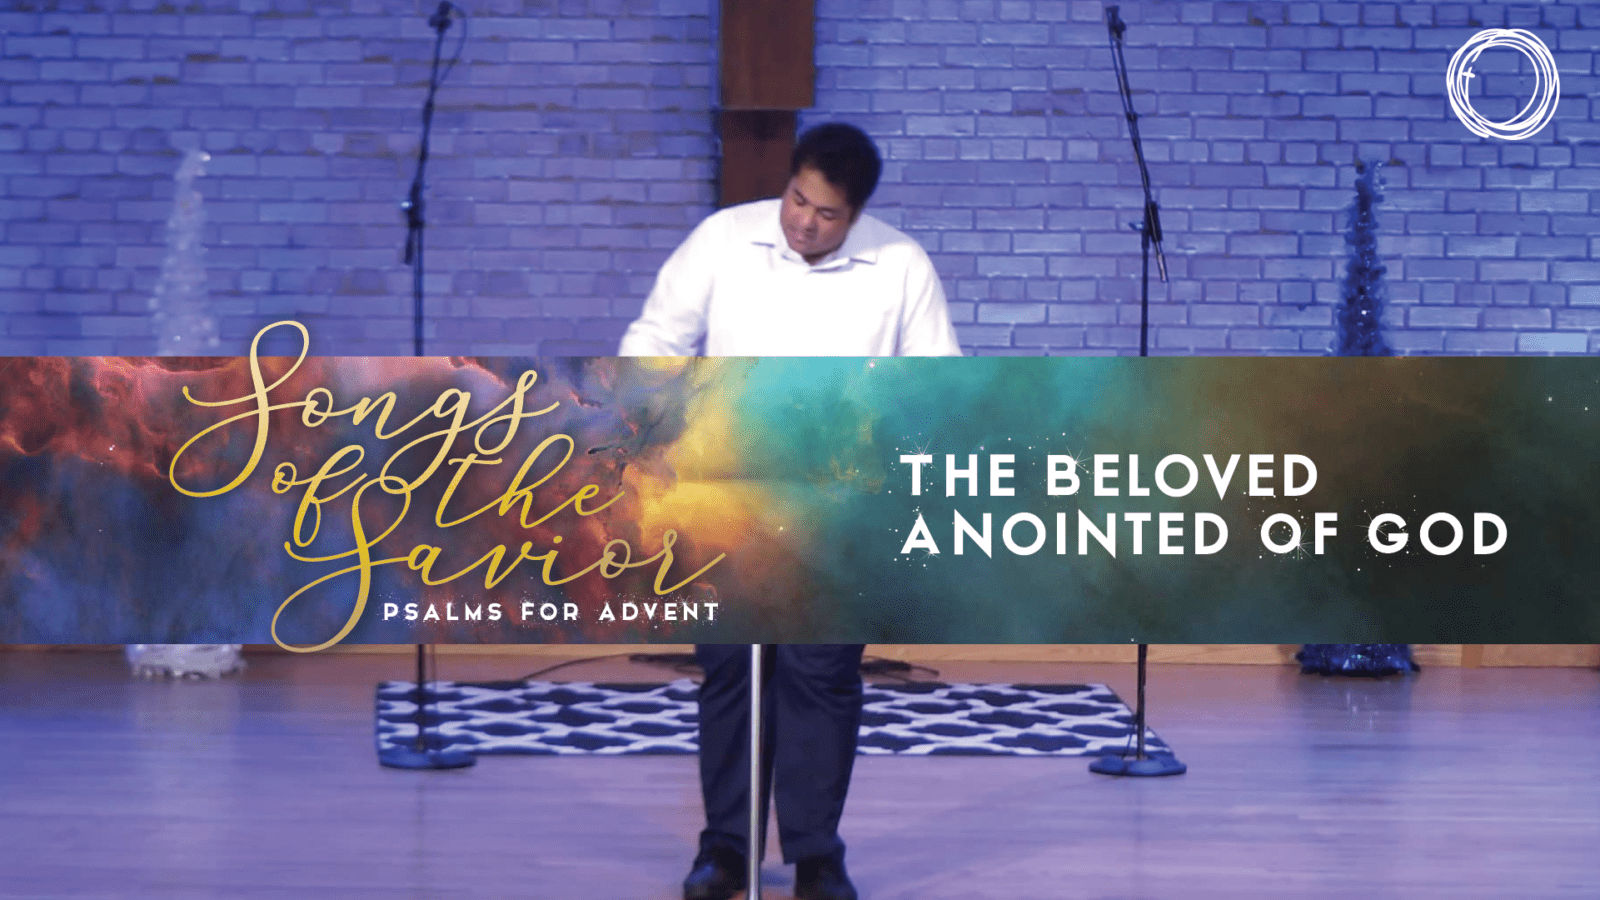 The Beloved Anointed of God